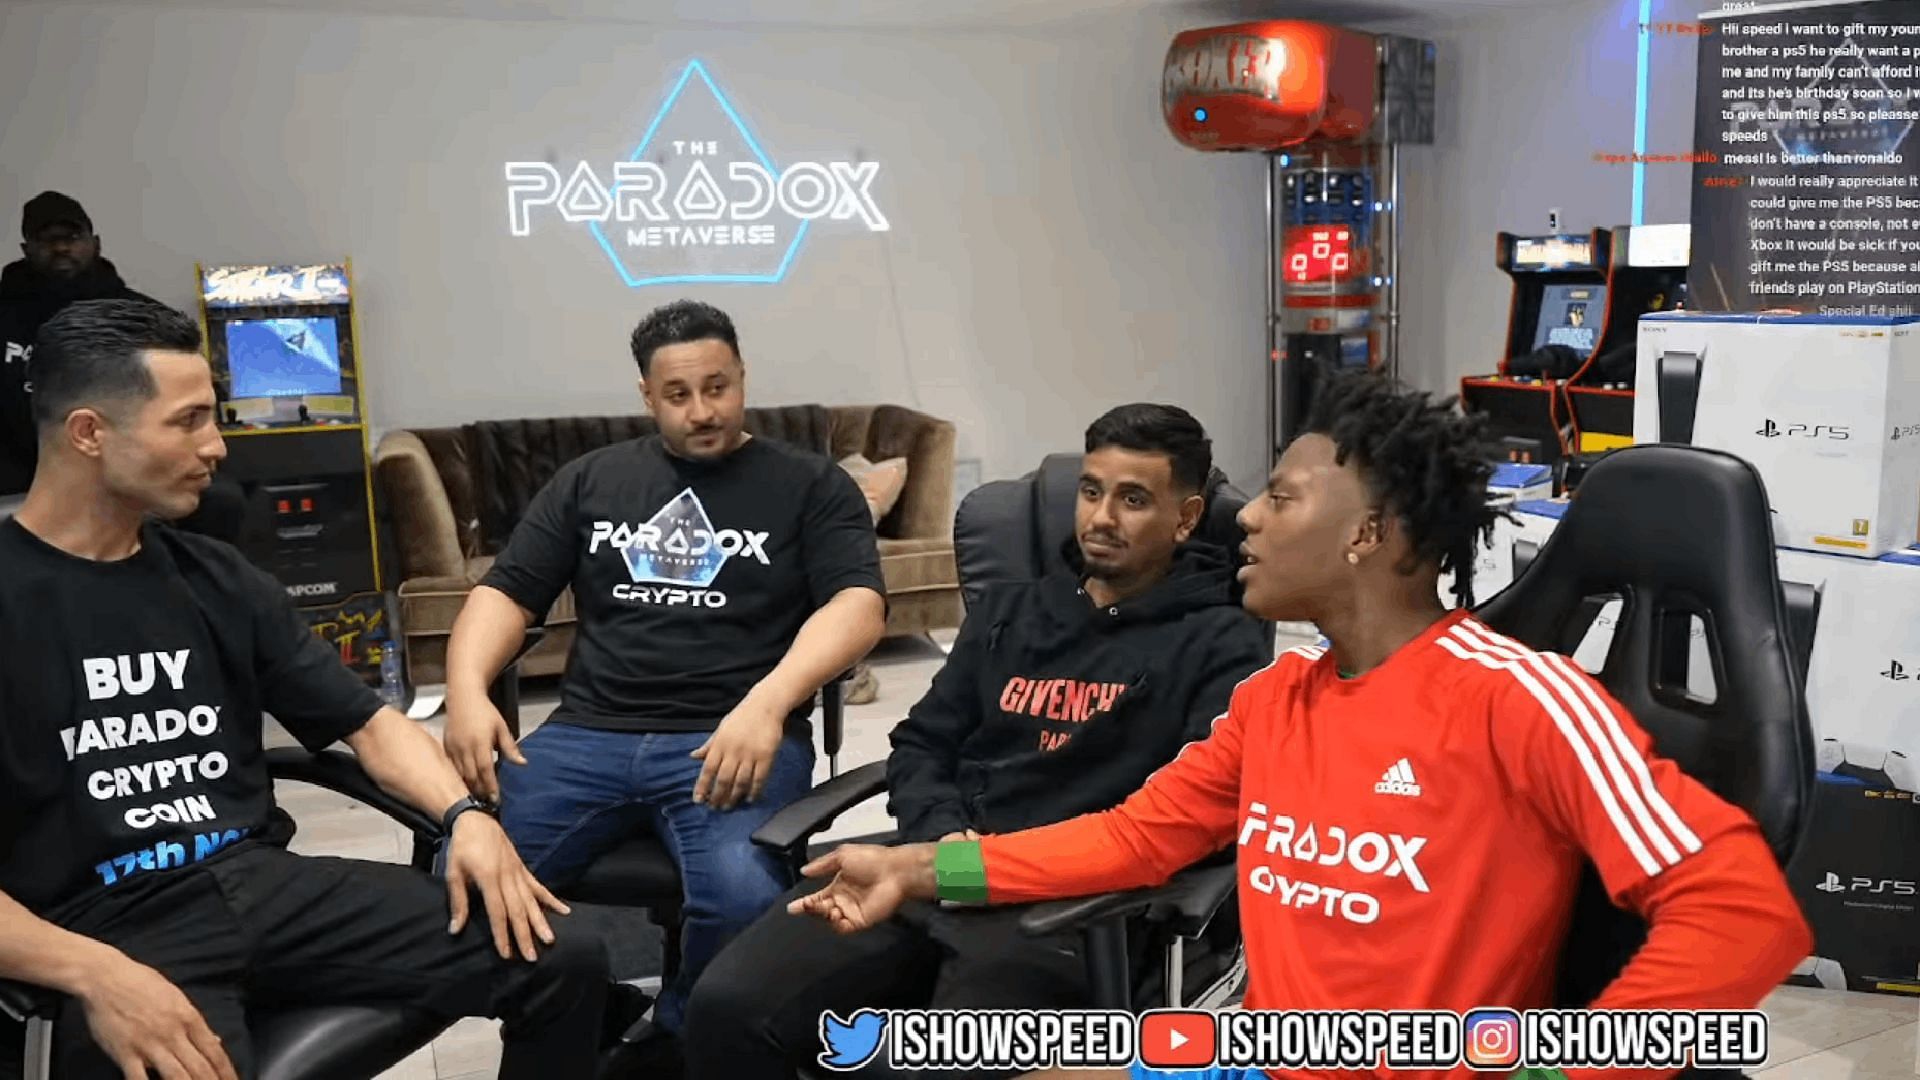 IShowSpeed promoting Paradox Crypto on his stream from yesterday (Image via YouTube)